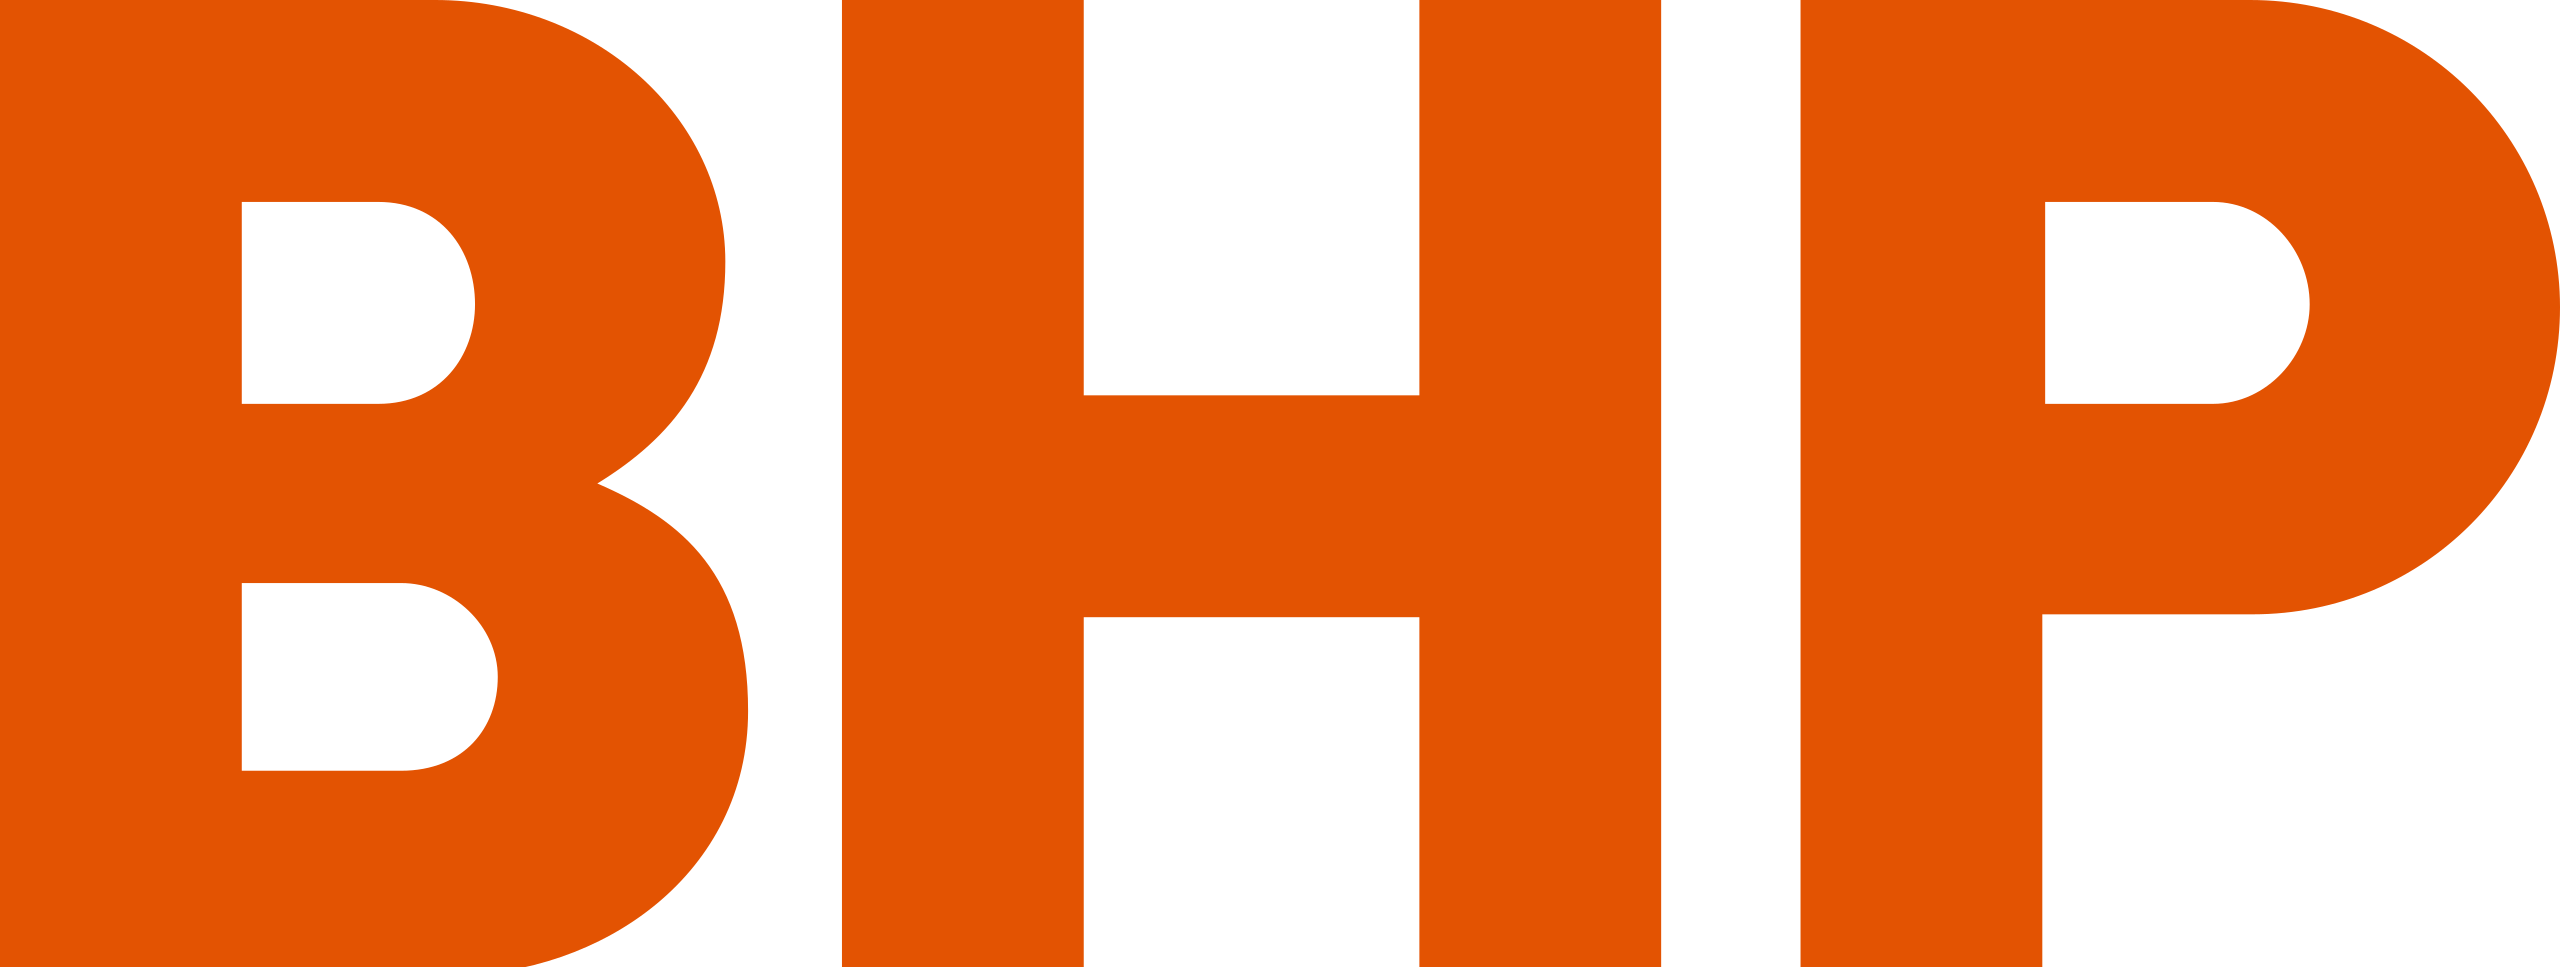 BHP logo in orange and black, representing fire safety equipment.